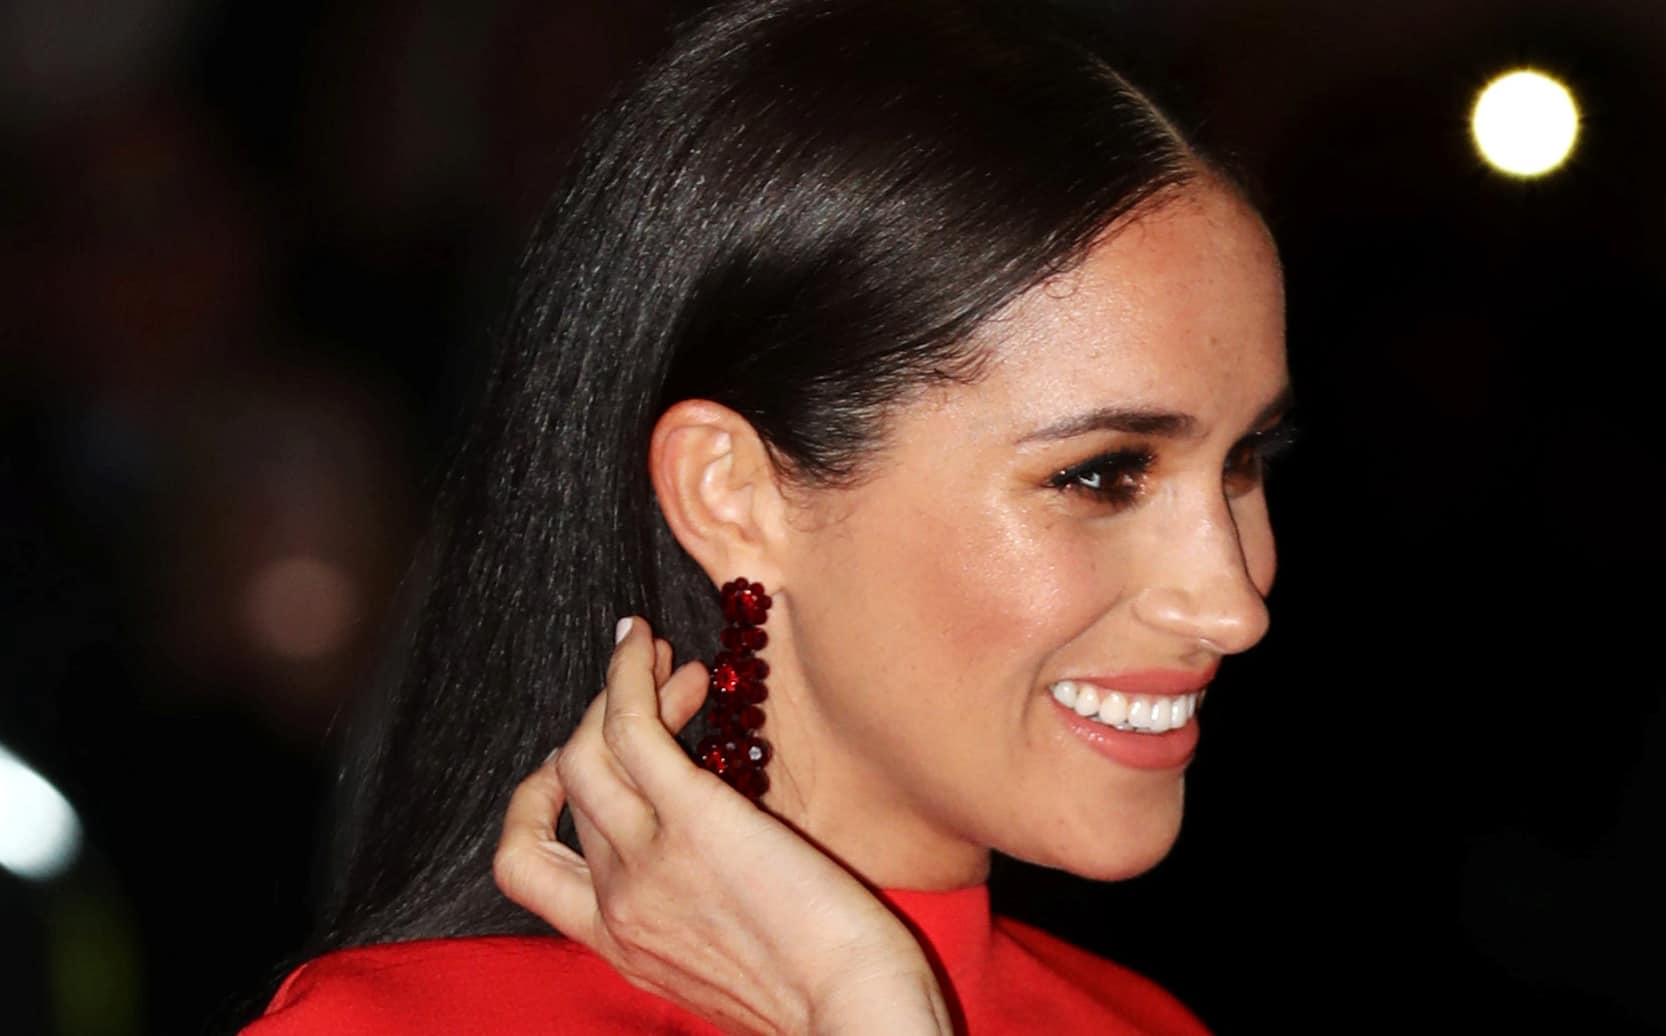 Meghan slams publisher of Mail on Sunday after legal victory – she didn’t hold back